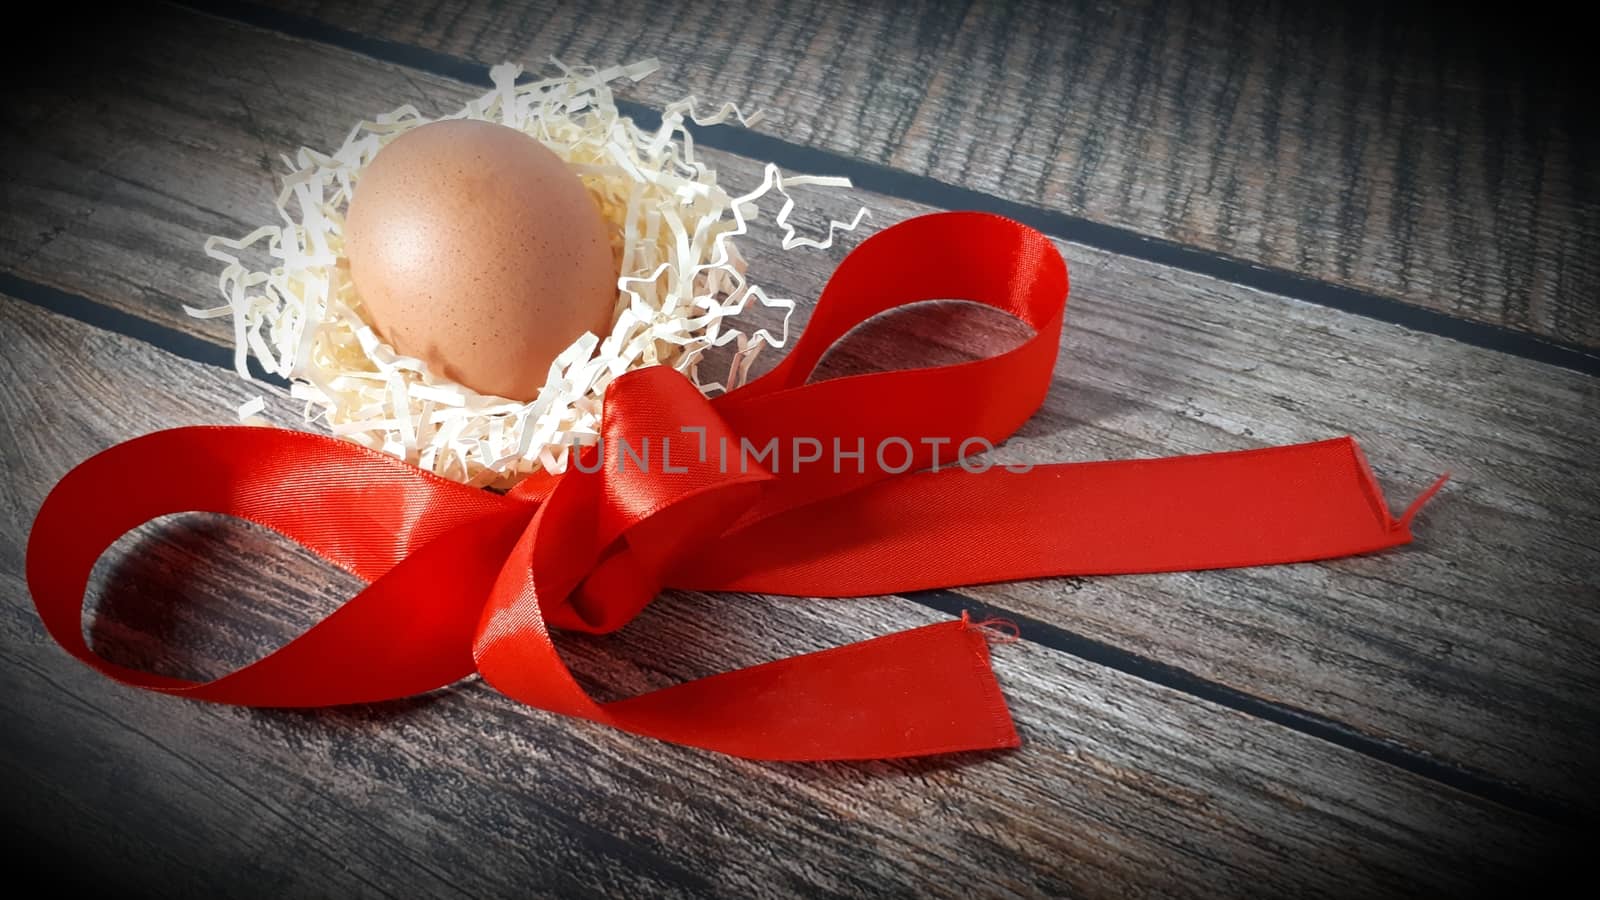 Chicken egg in a nest of straw and red satin ribbon on a wooden table. by alexey_zheltukhin